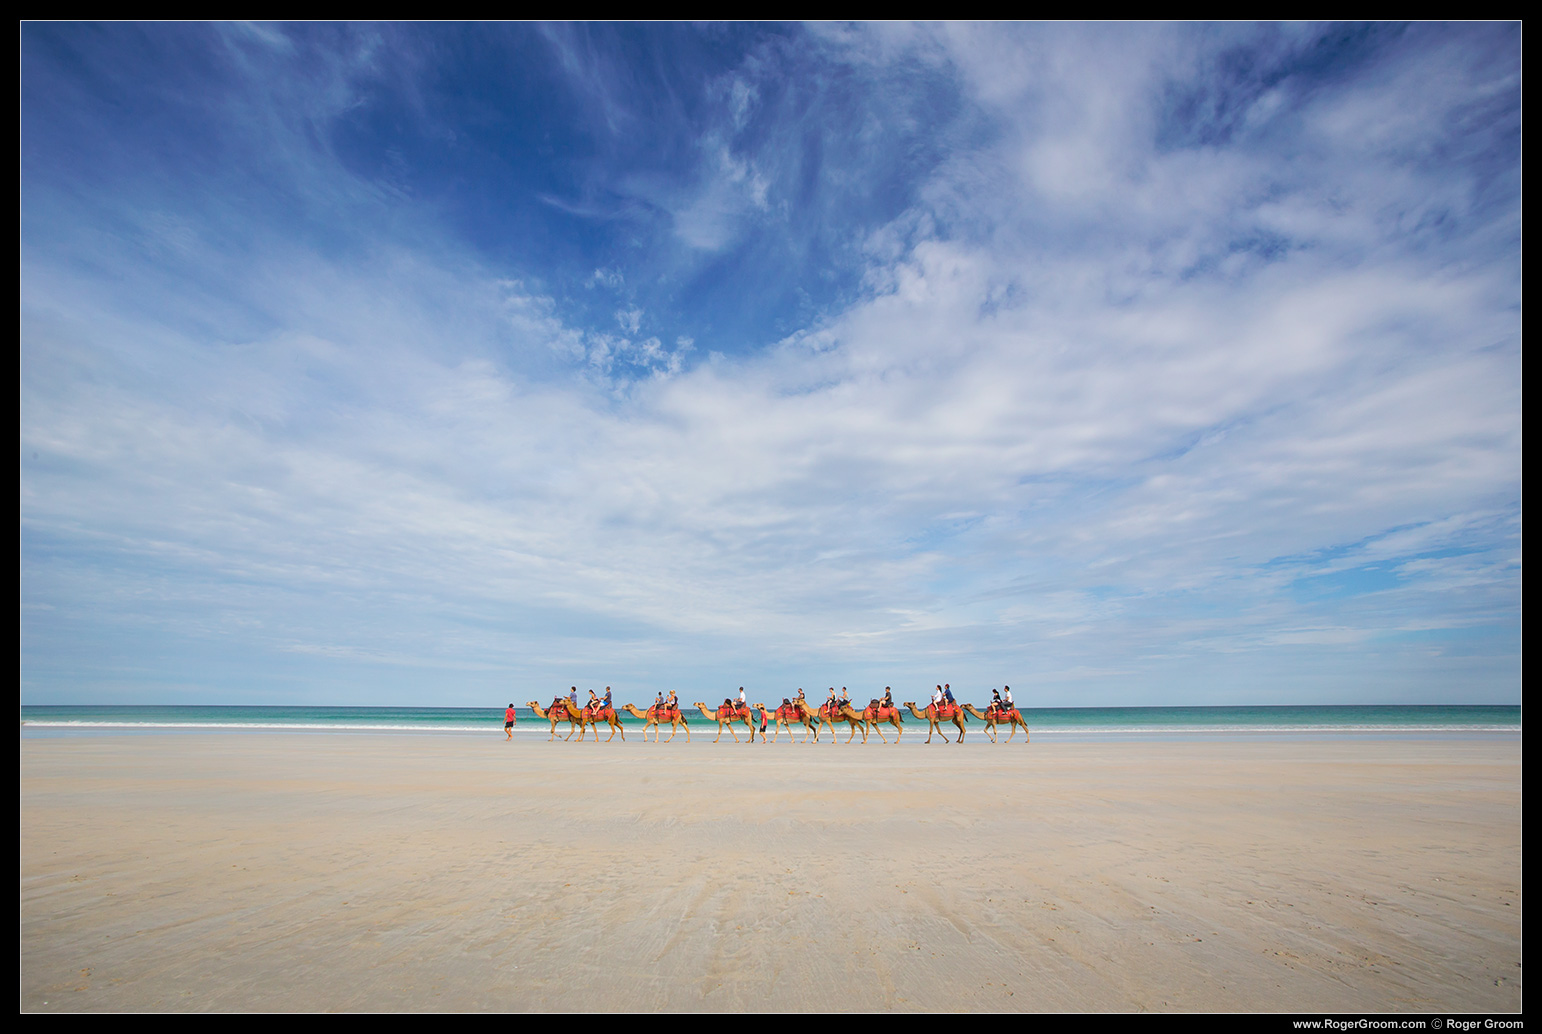 Camels on Cable Beach with the spectacular sky and sand.